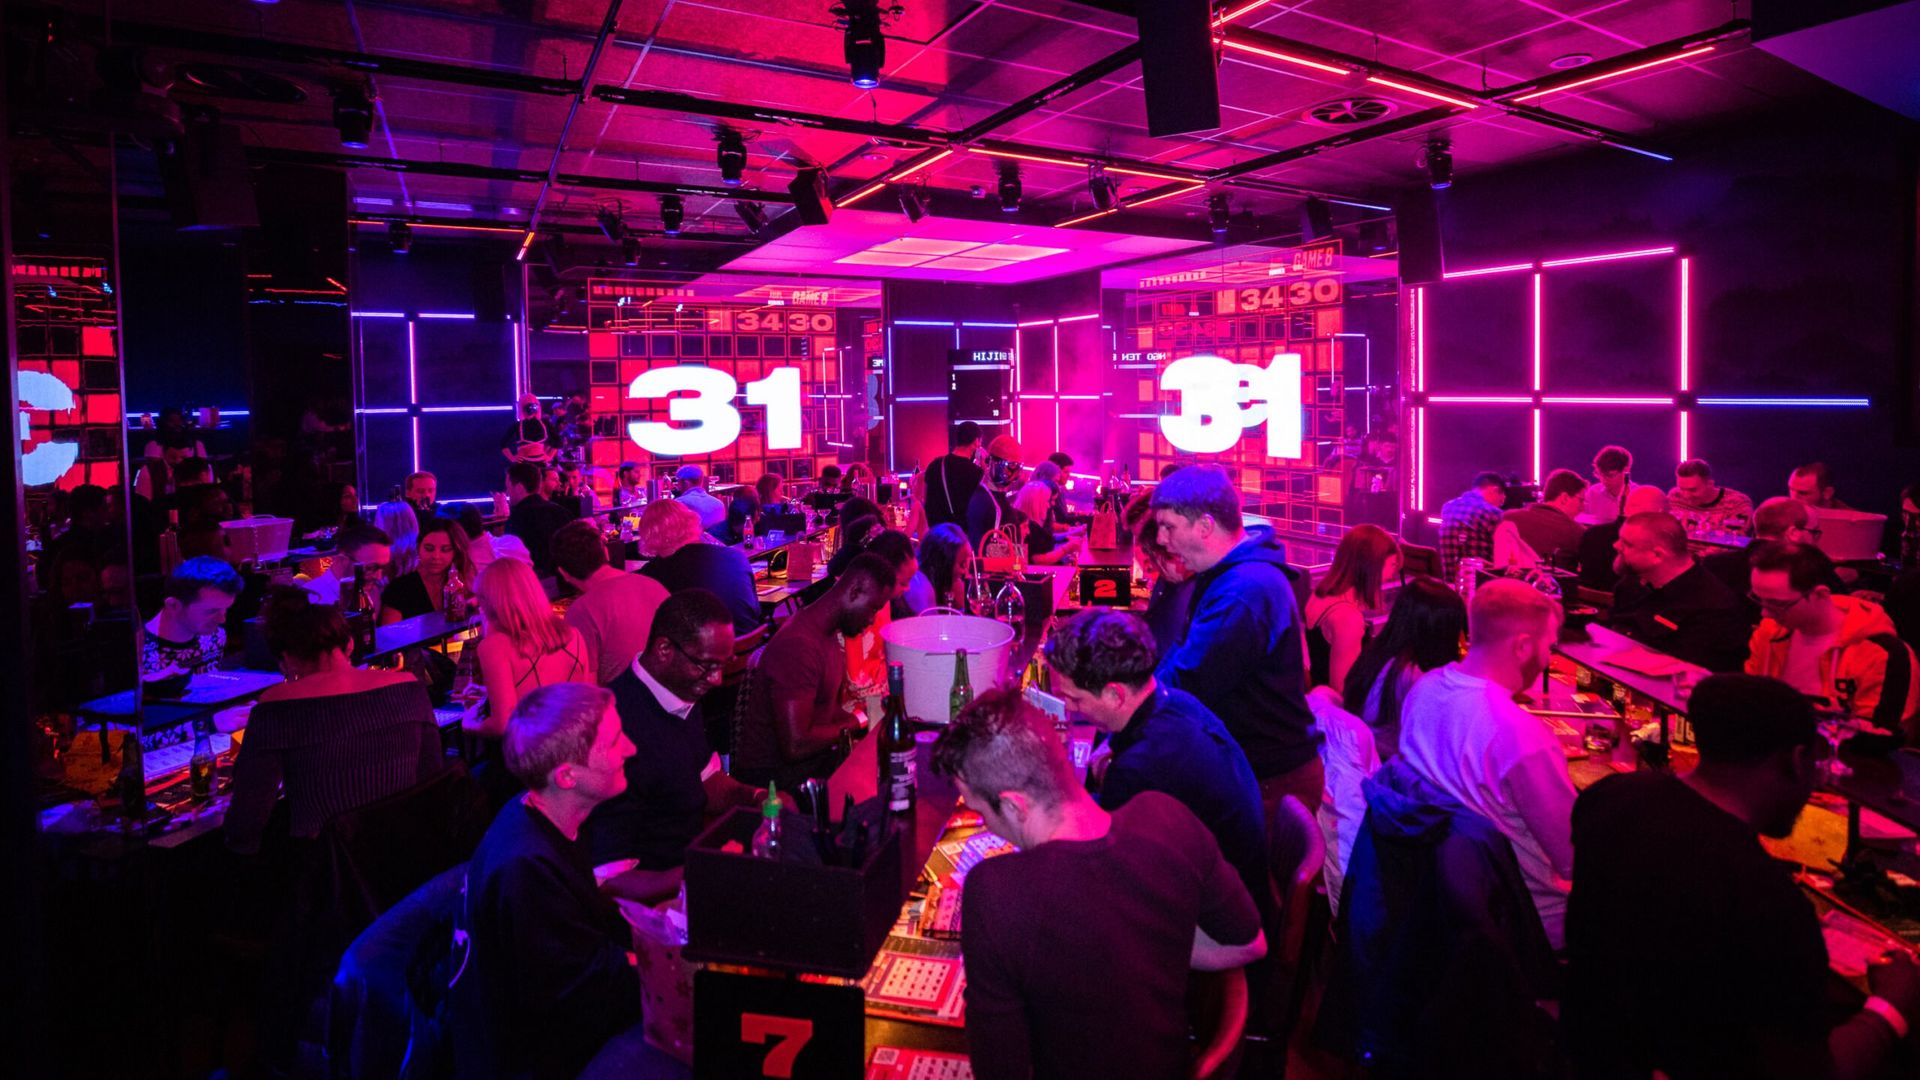 A nightclub interior where people are playing bingo and the number "31" is flashed in giant screens.